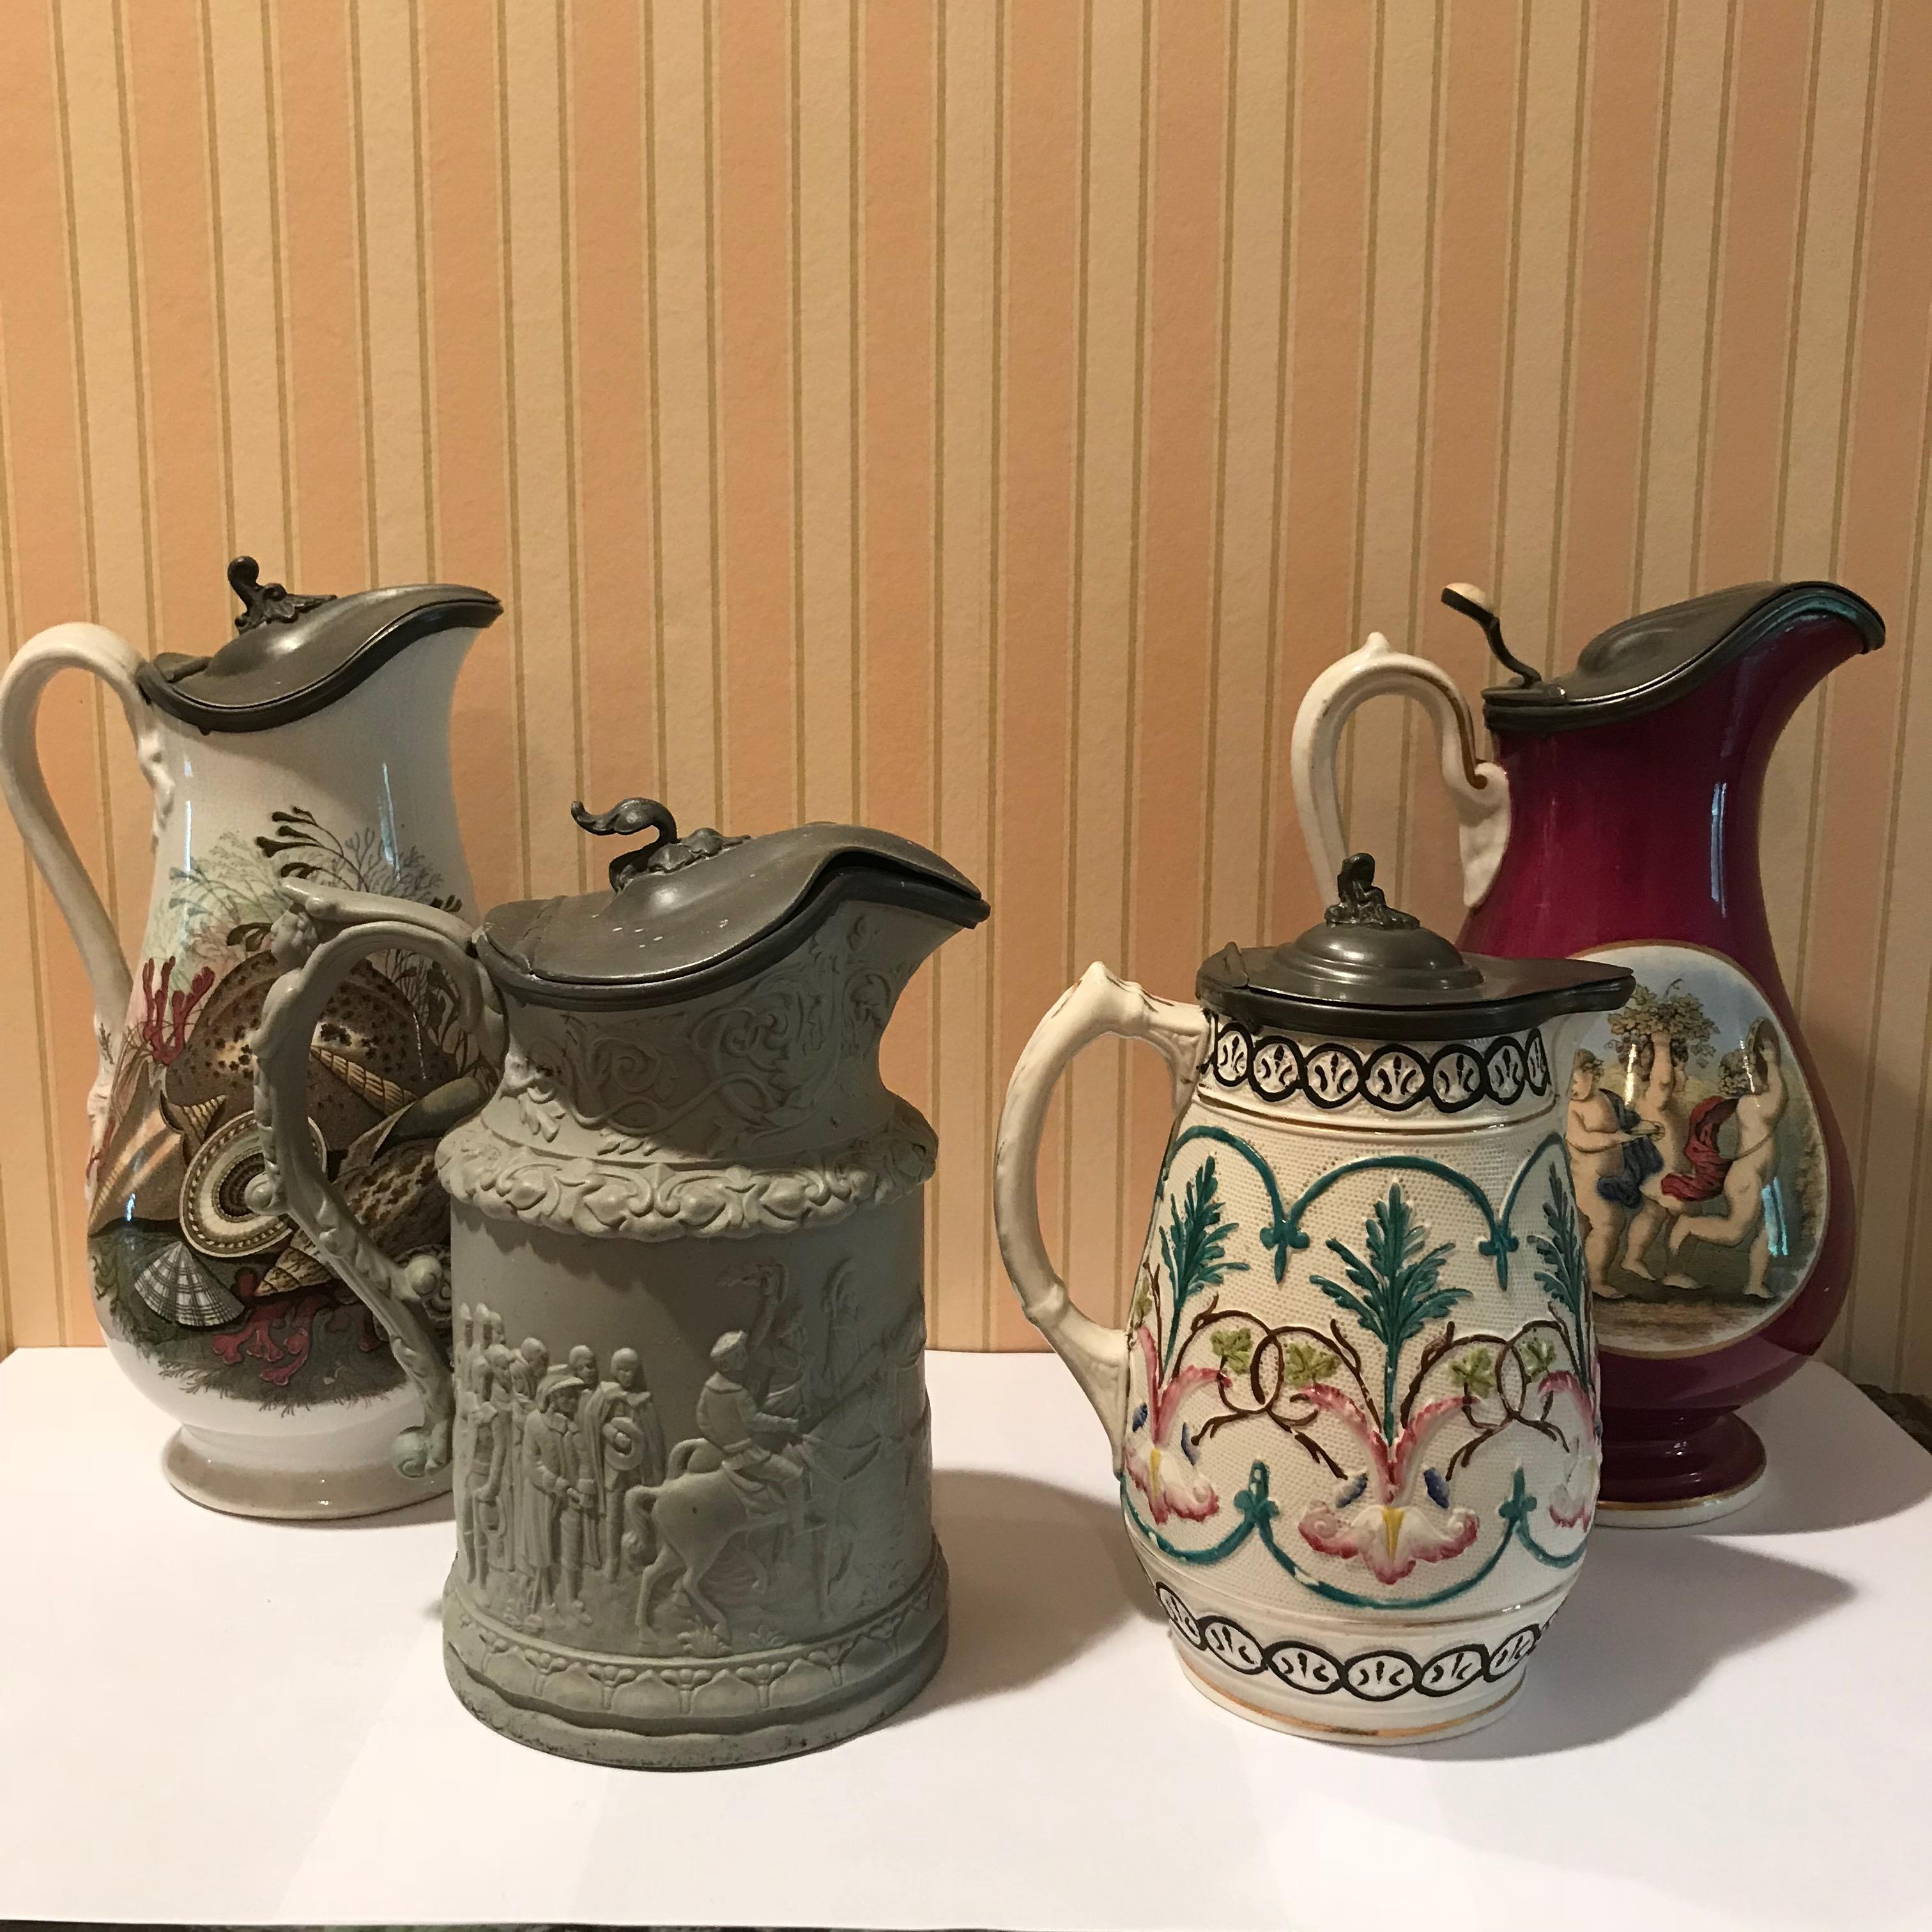 Lot of four (4) Pewter top porcelain pitchers and tankards. Each decorated with floral patterns and figurative scenes. All in excellent condition.
1: M.W.&Co 1860s, H 9.75